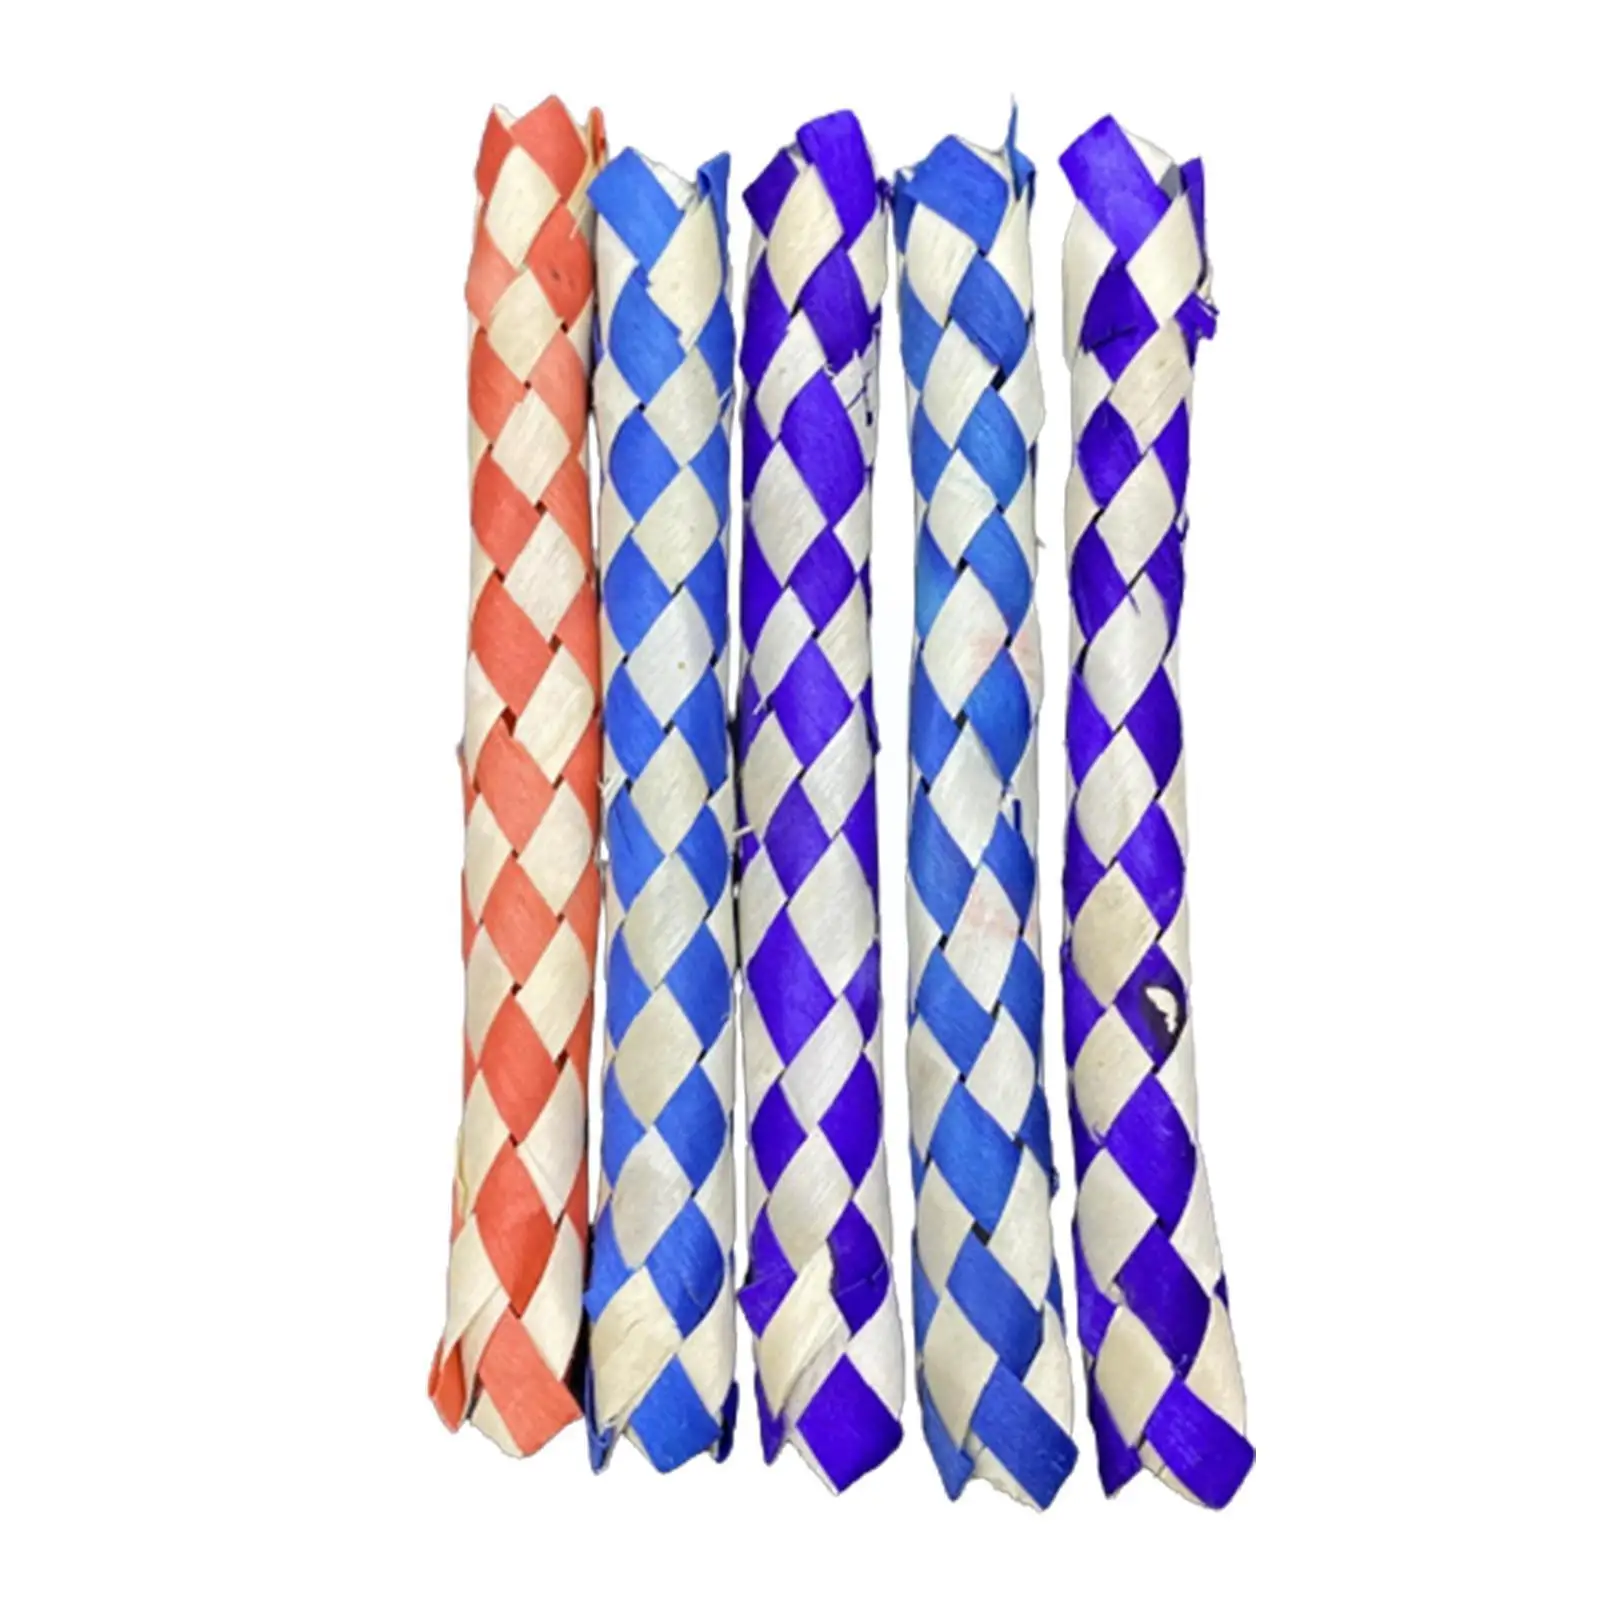 

15cm Finger Traps Classic Chinese Bamboo Tube Finger Toys Party Traps Prank Diy Gifts Prizes Replacement Give Away D7i2